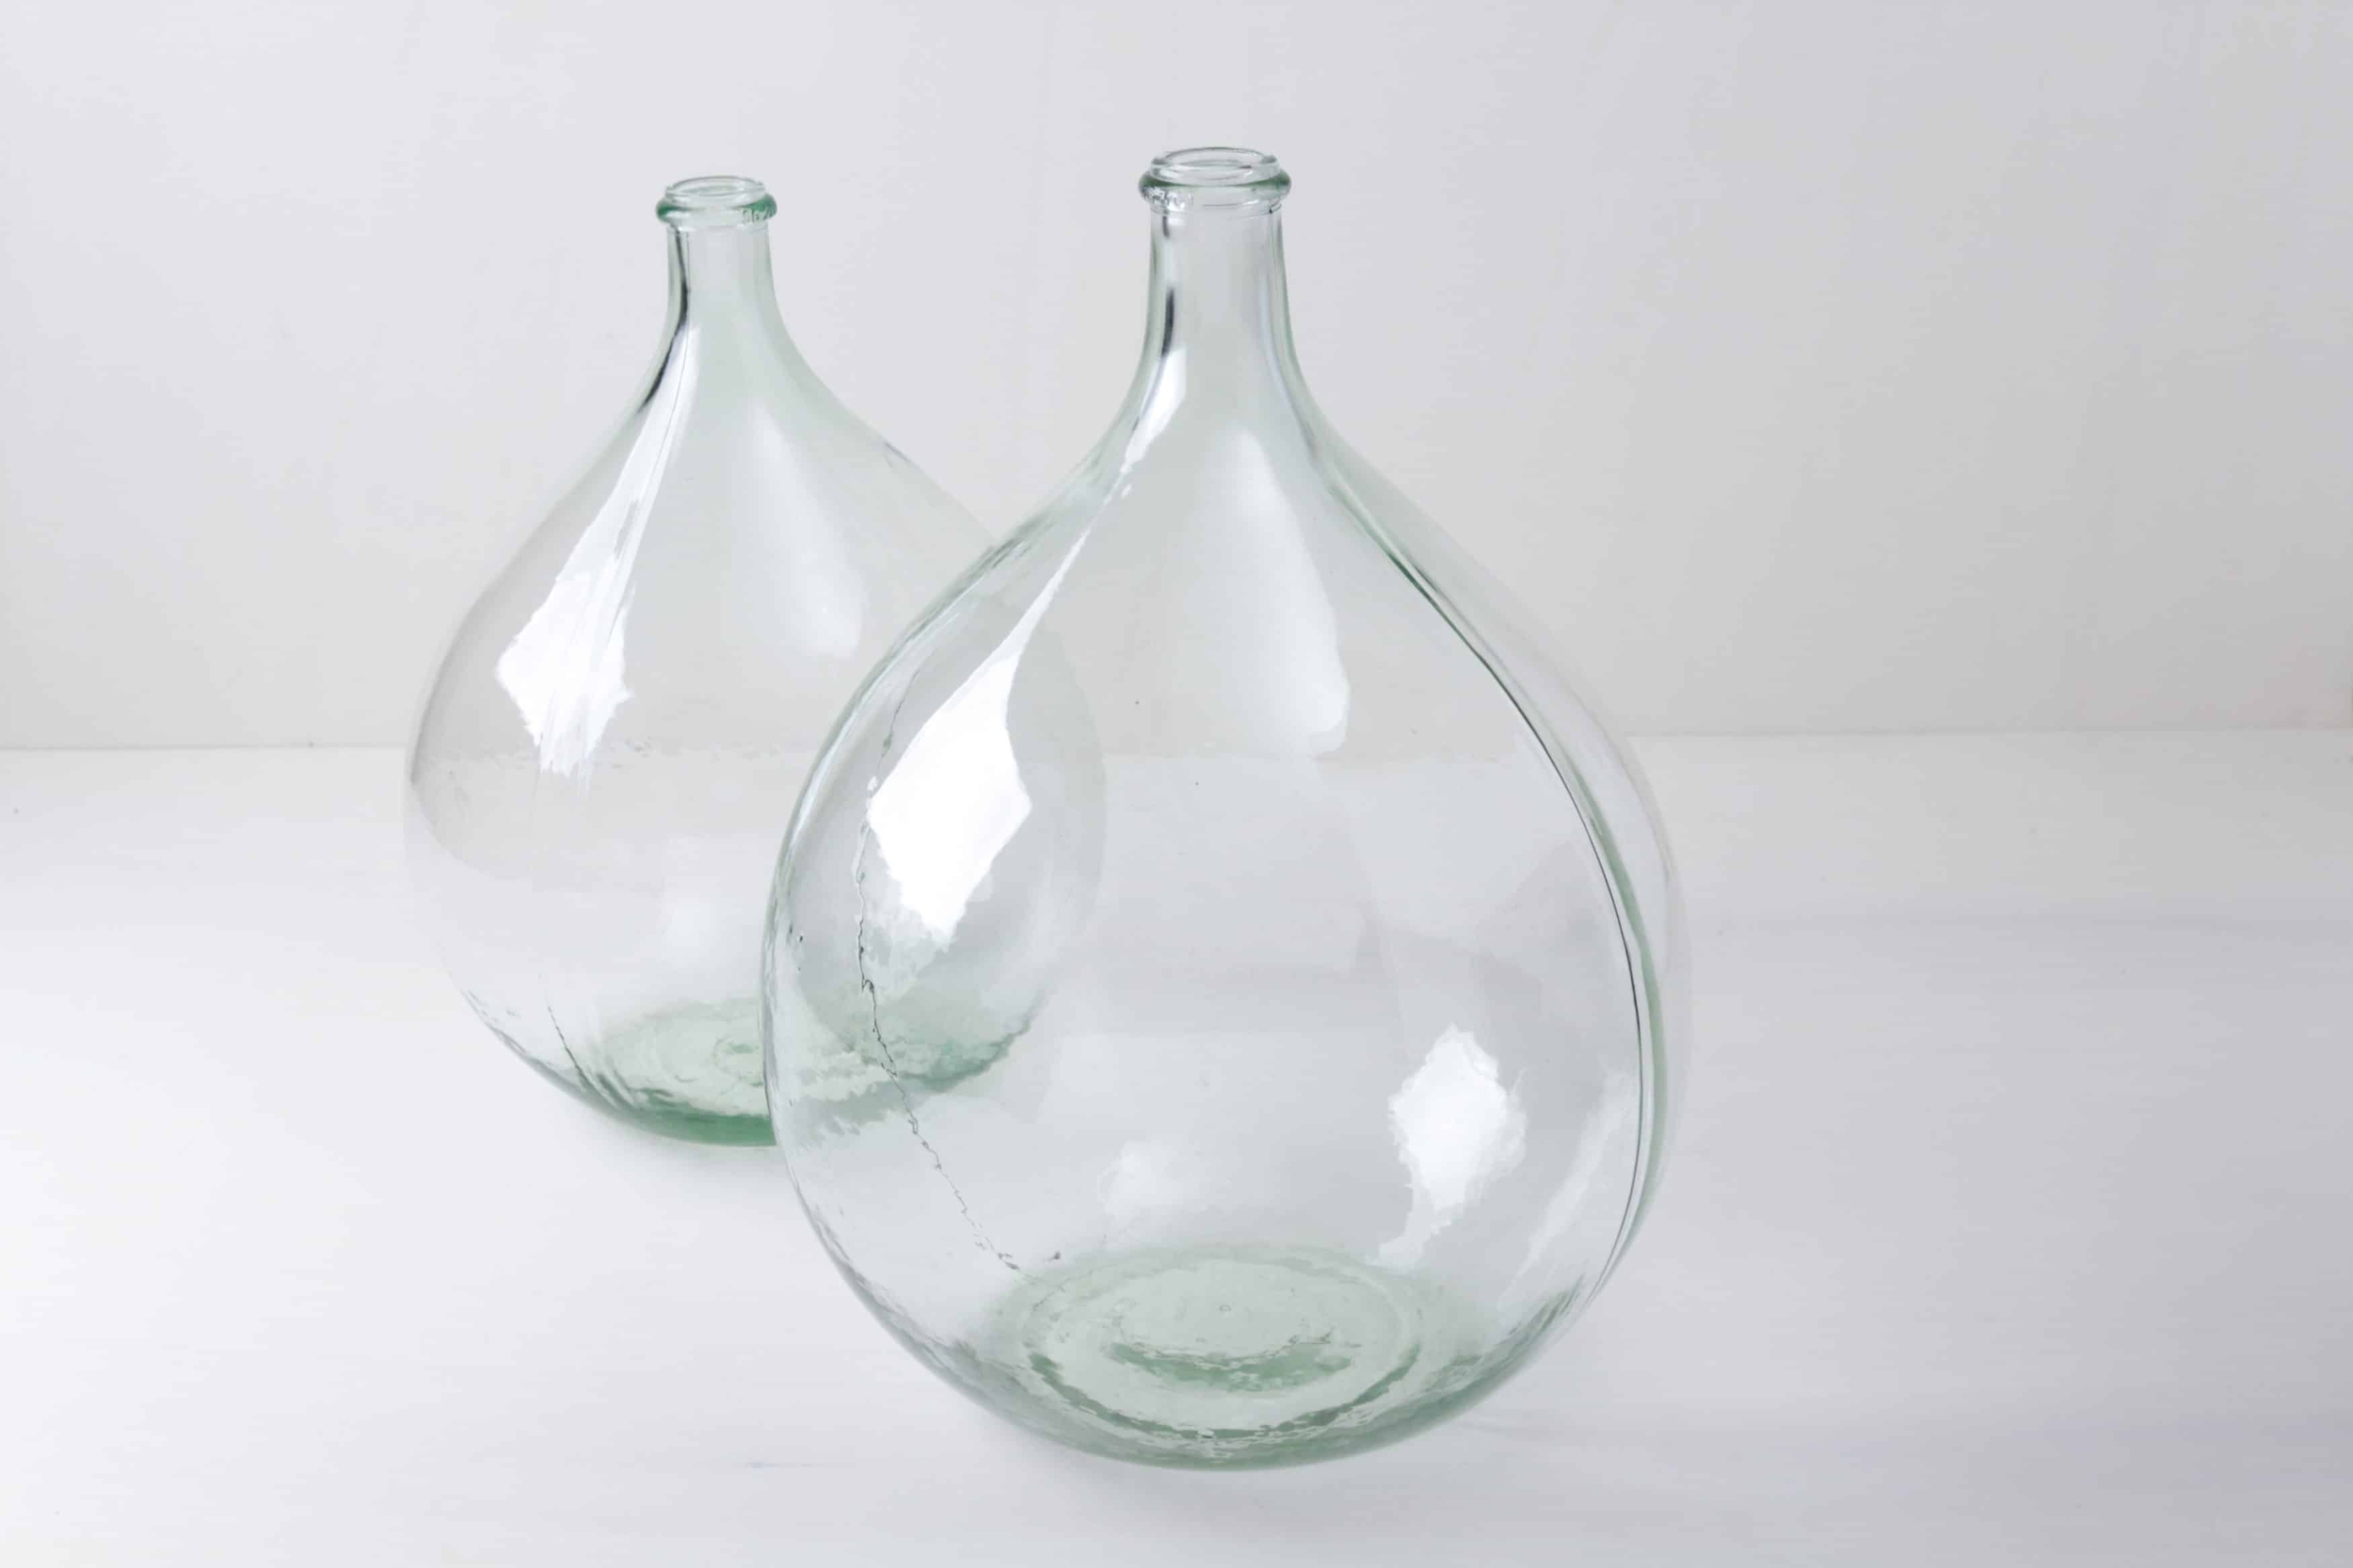  | The demijohn Aurelia is wonderfully decorative. The beautiful large vintage glass balloon is often rented for decorating or designing. Equipped with a large flower, it creates a fantastic picture. | 